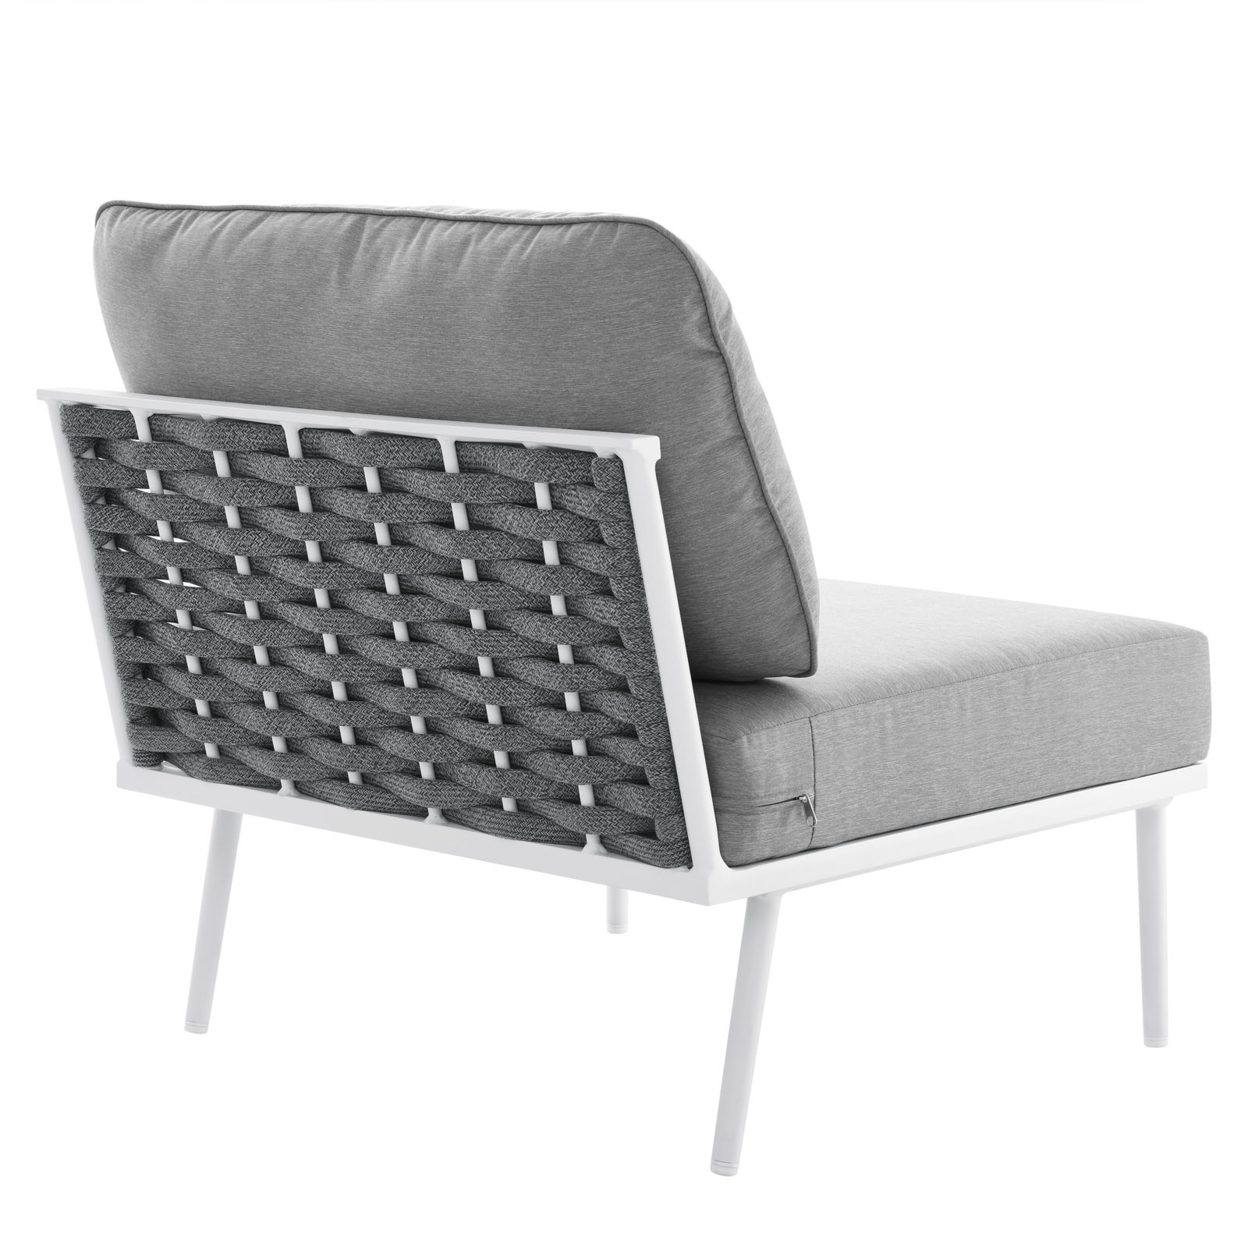 Modway Stance Modern Fabric & Aluminum Outdoor Armless Armchair in Gray - image 4 of 7